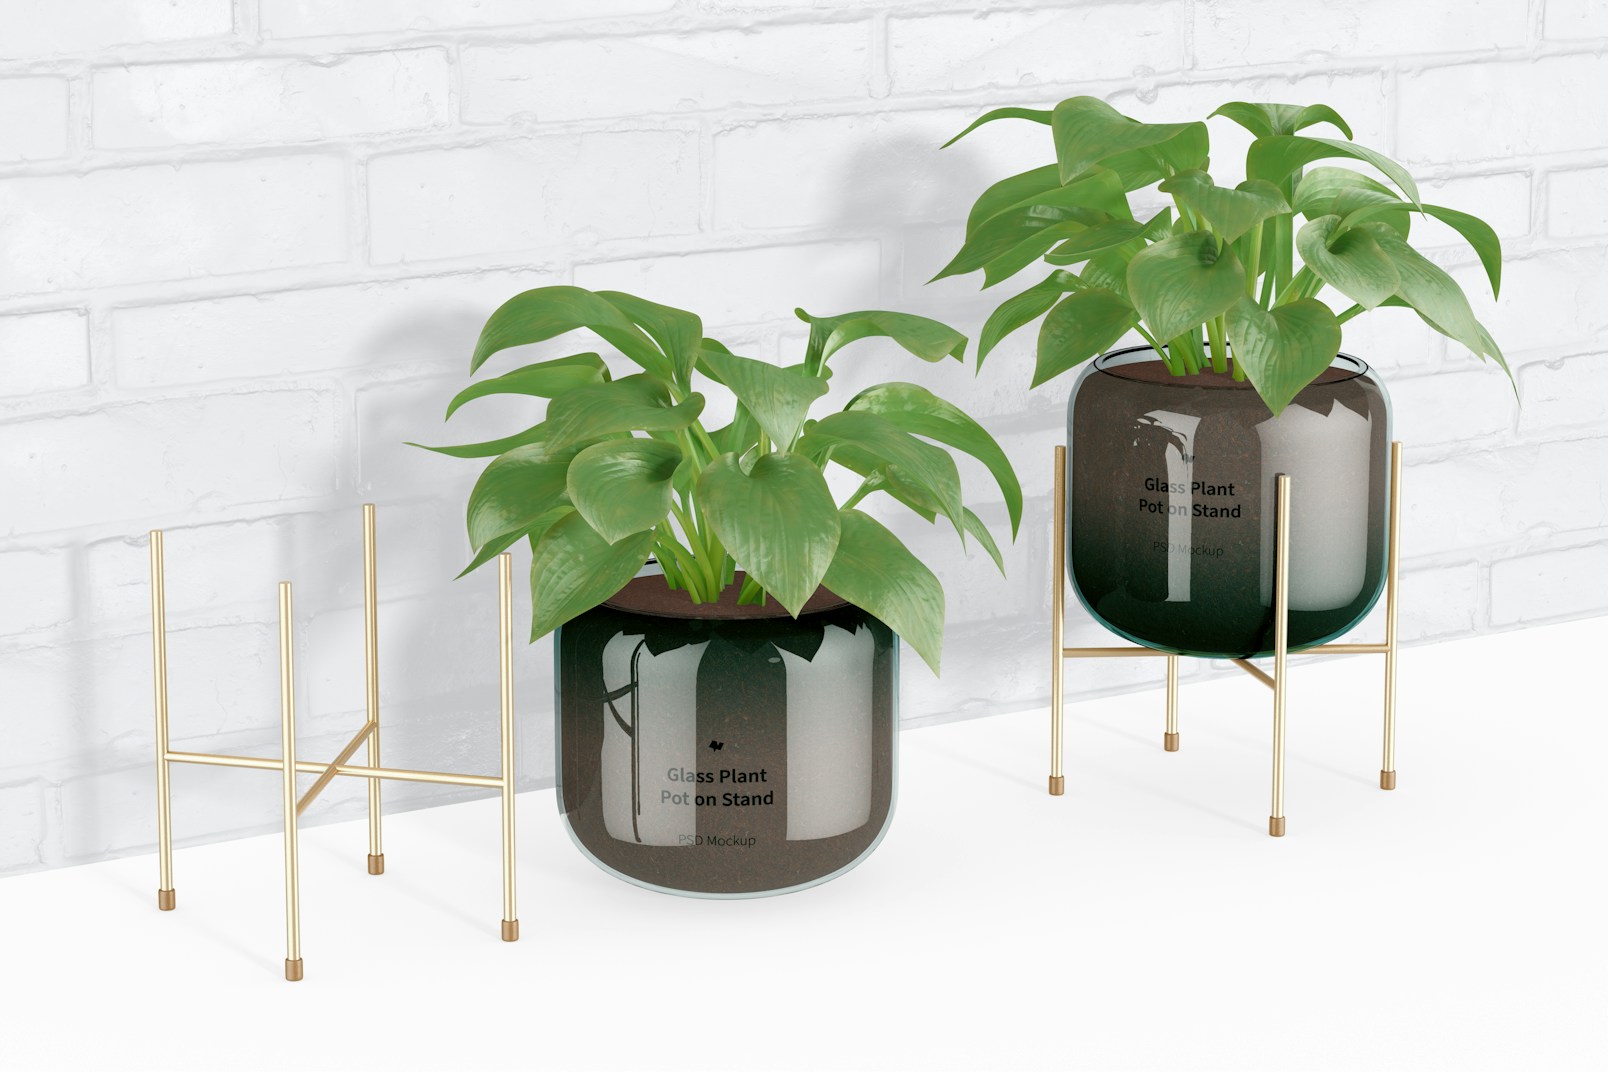 Glass Plant Pots on Stand Mockup, Perspective